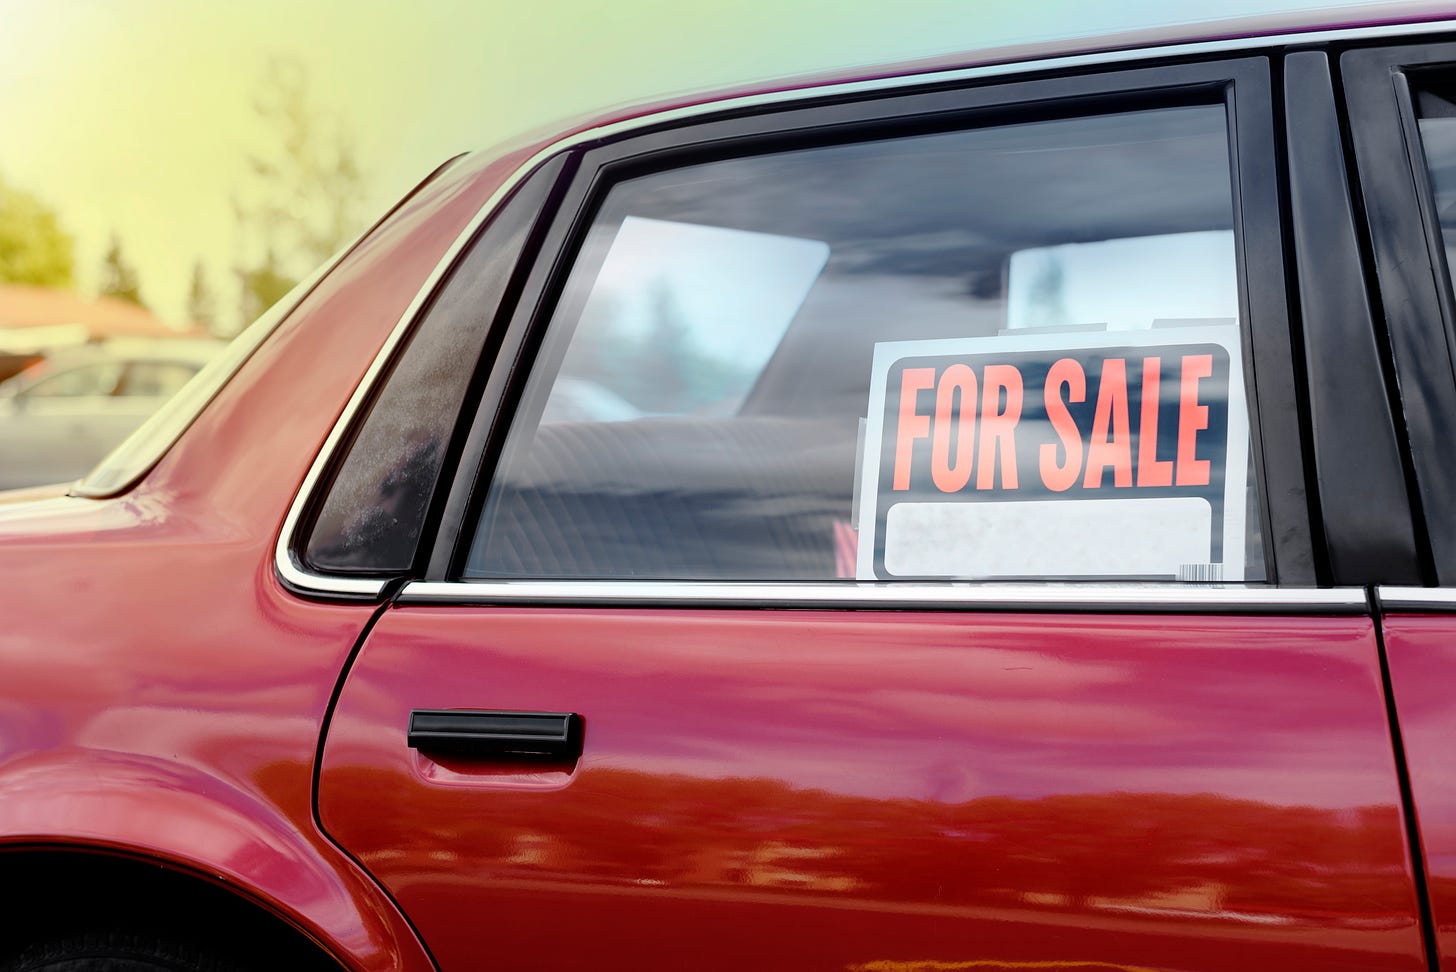 How to make sure a used car is safe